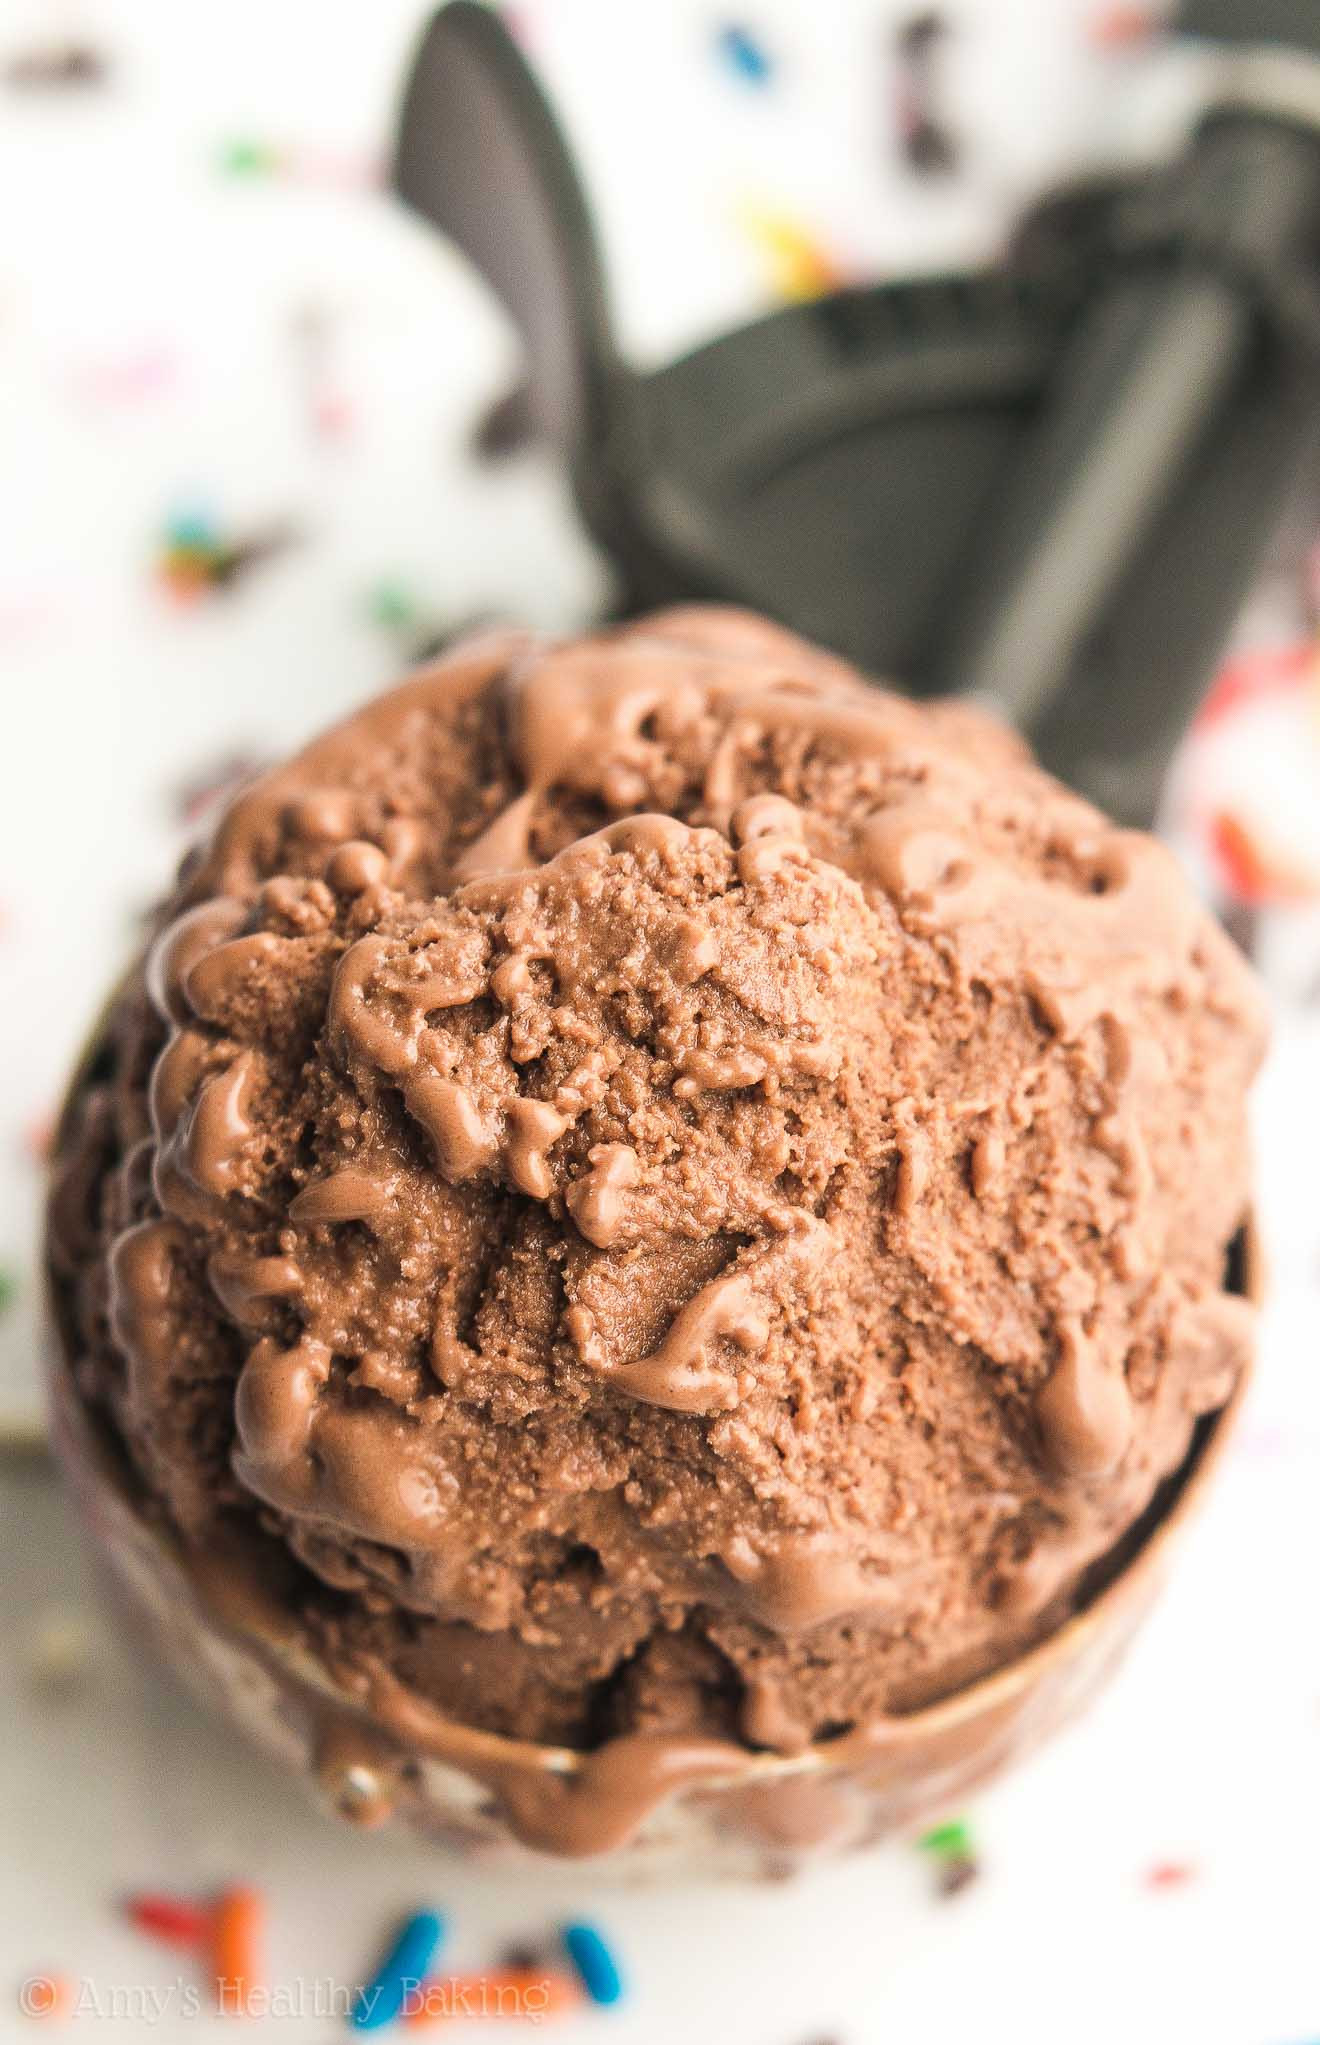 Low Fat Ice Cream Recipes For Cuisinart Ice Cream Makers
 The Ultimate Healthy Chocolate Ice Cream